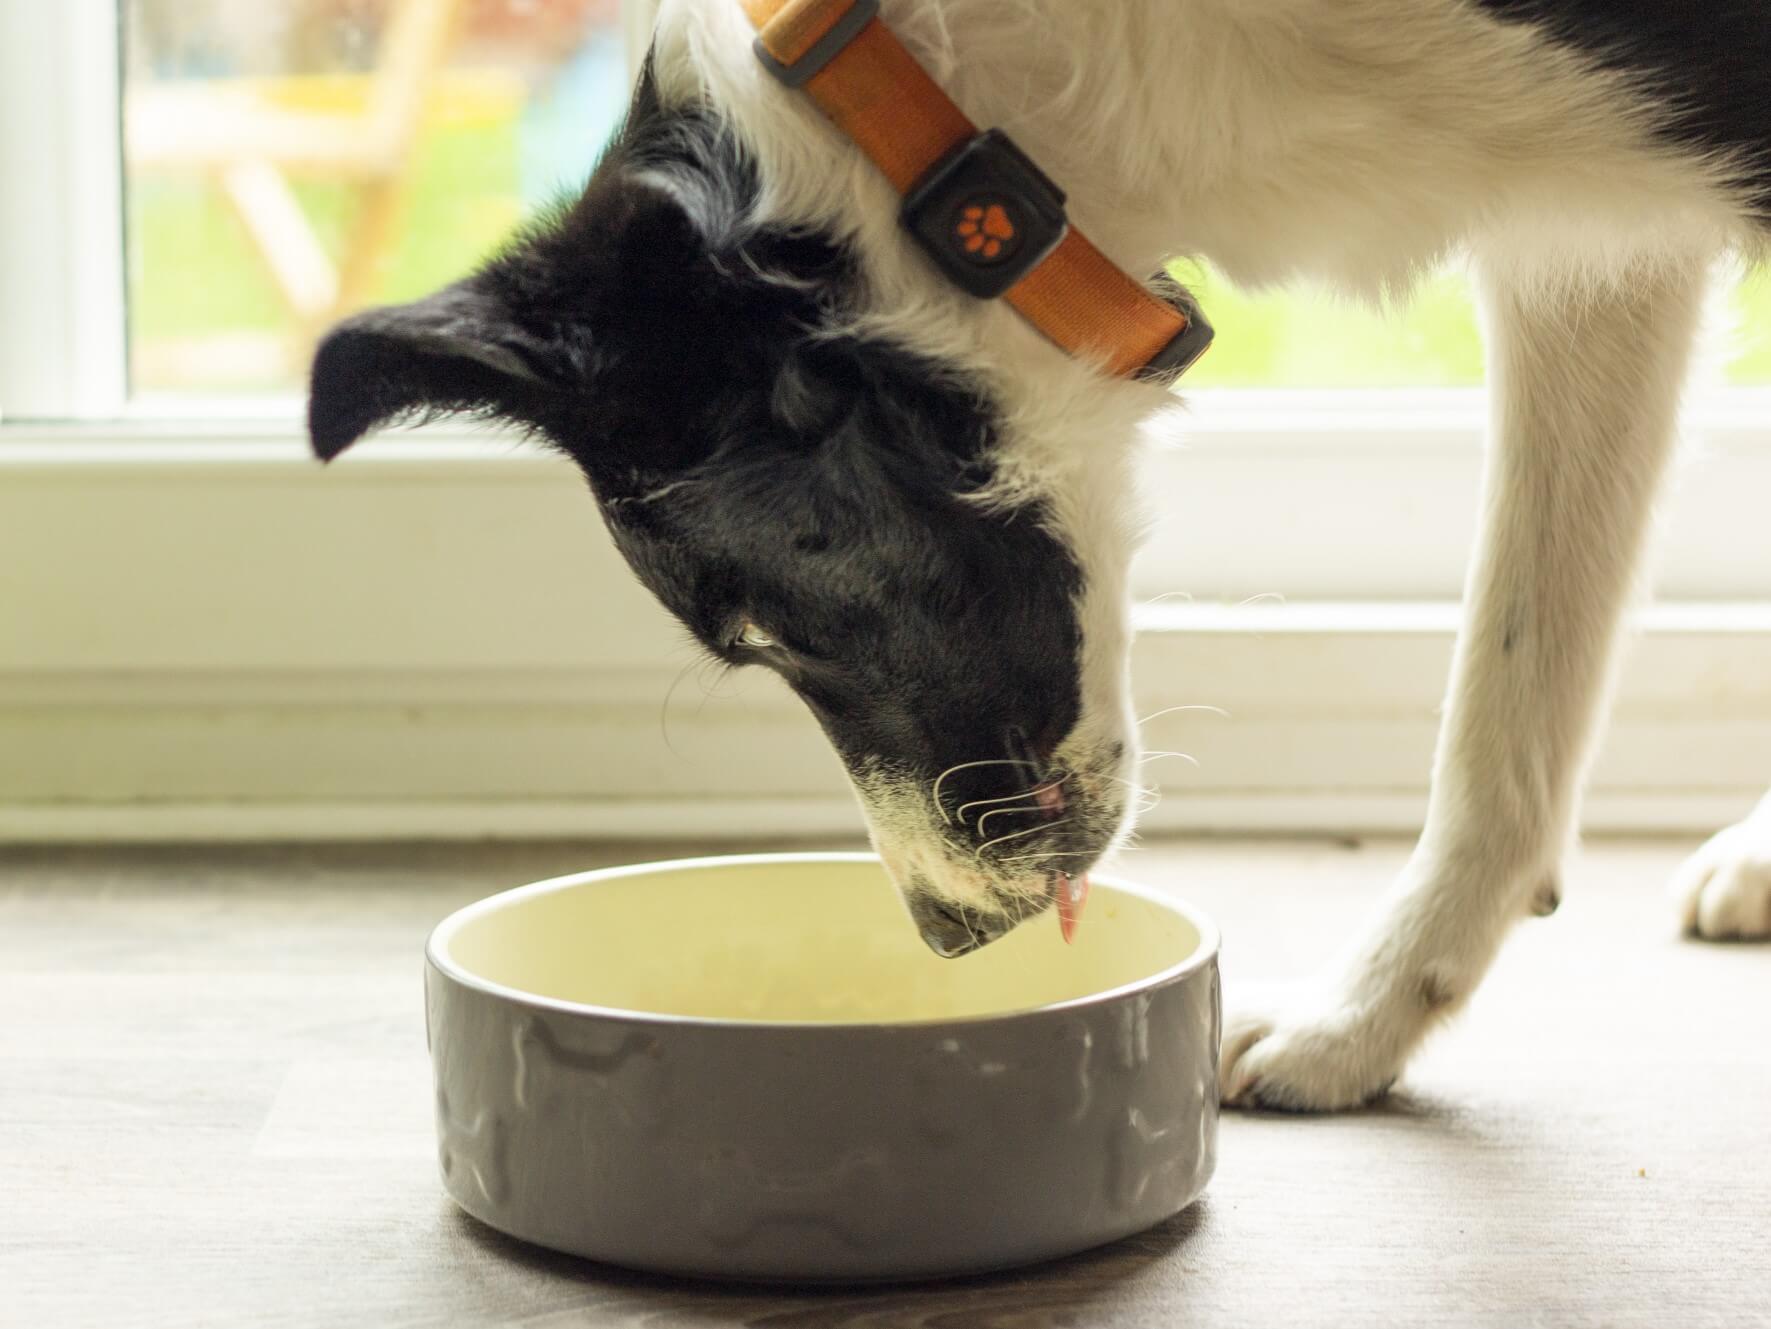 What Should I Do About My Dog's Grain-Free Diet